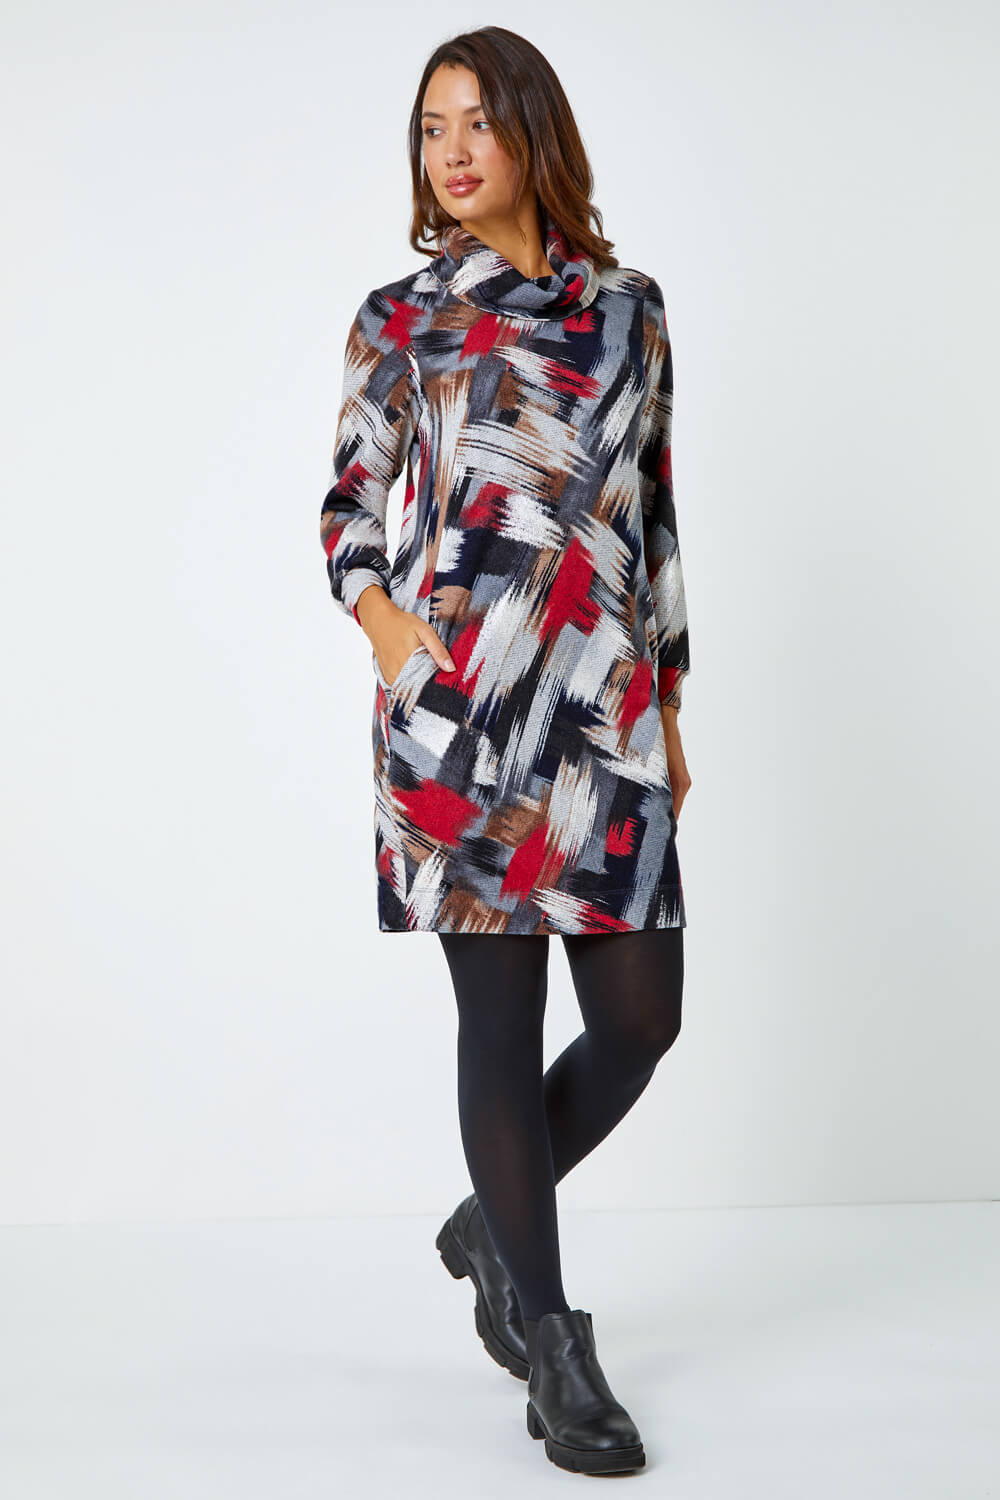 Red Cowl Neck Abstract Print Stretch Dress, Image 2 of 5